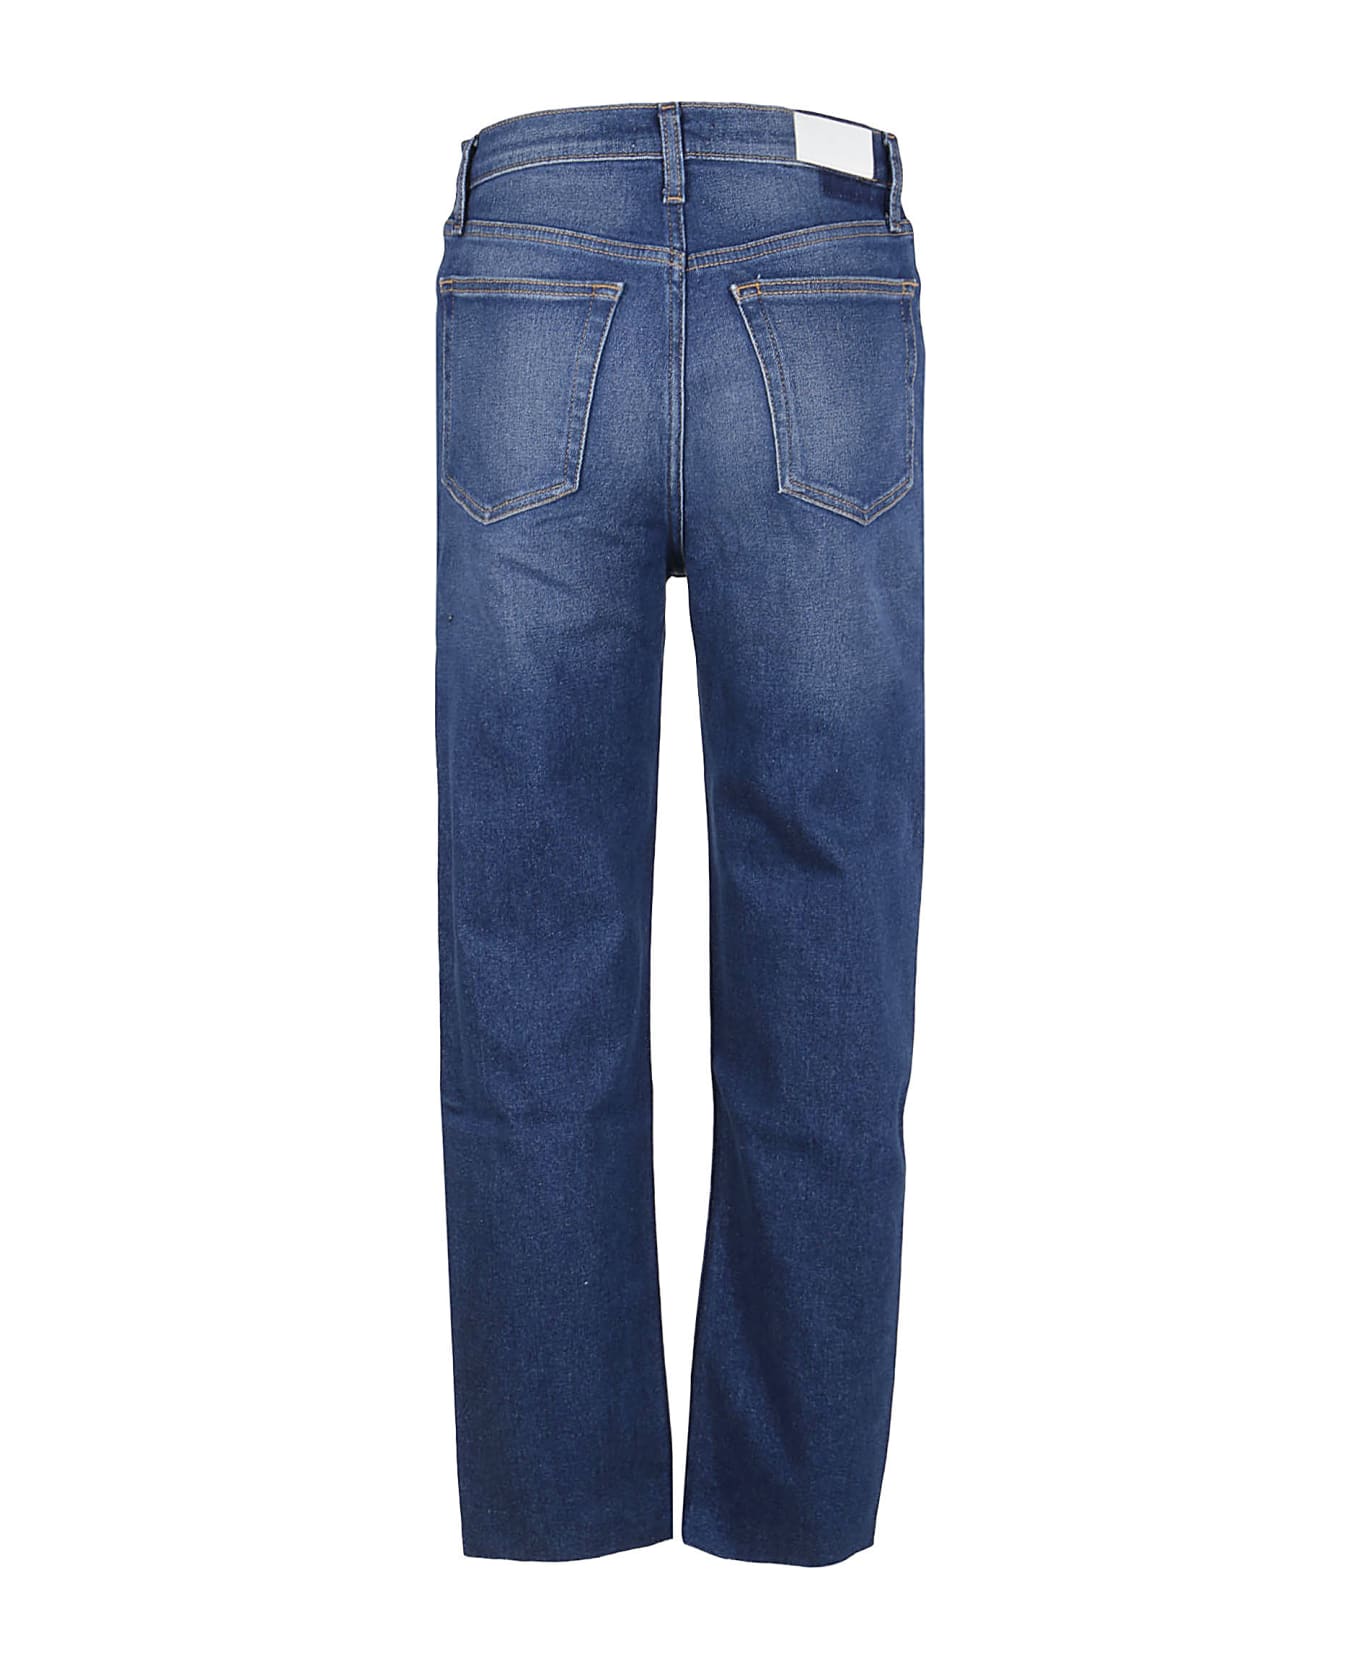 RE/DONE 70s Stove Pipe Jeans - Deep Indigo Fade